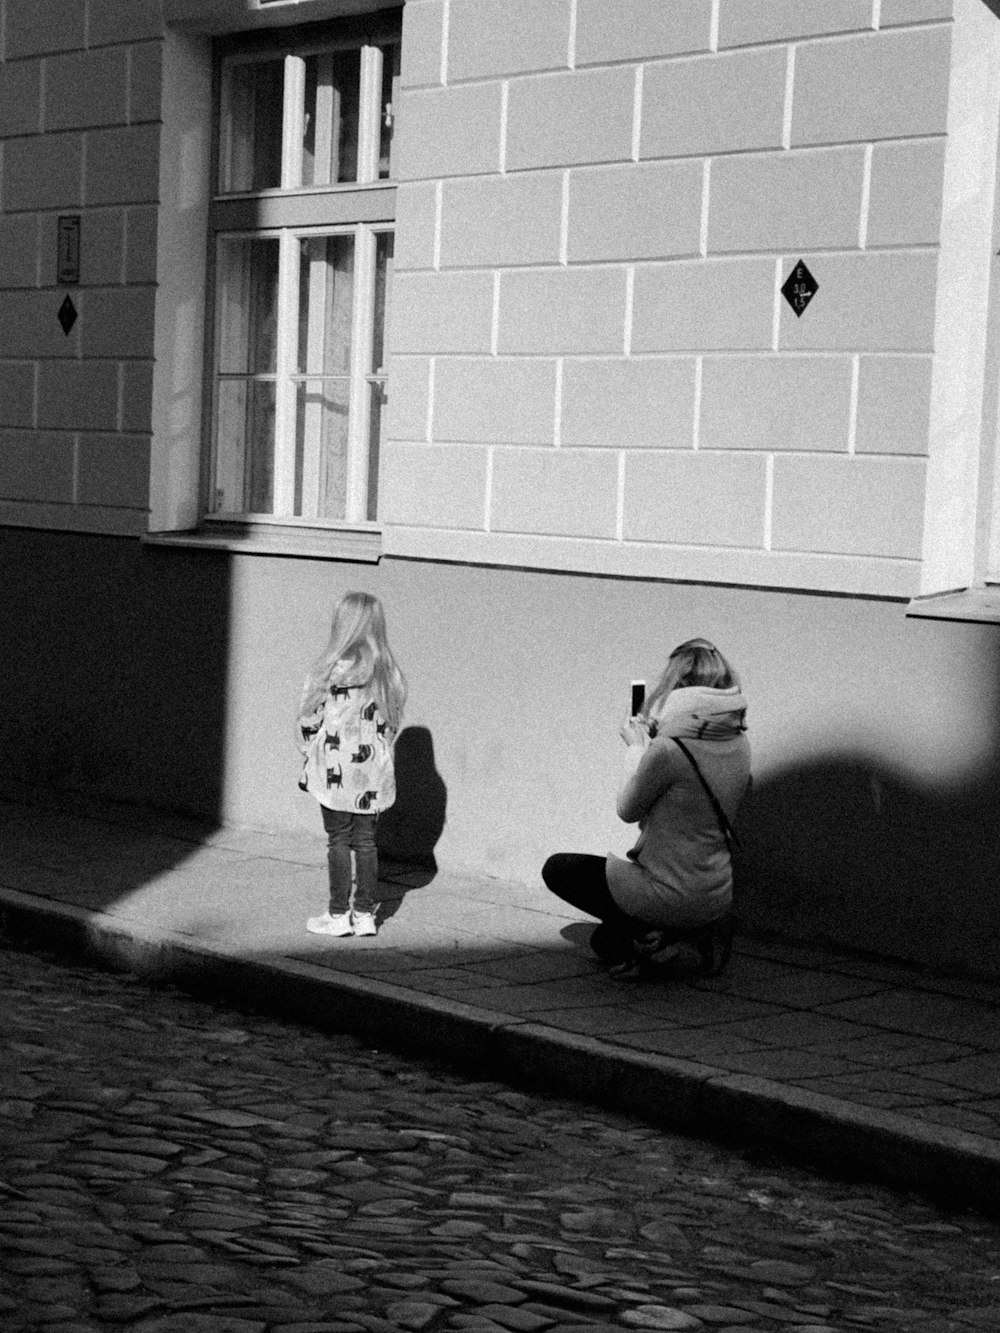 a woman taking a picture of a little girl